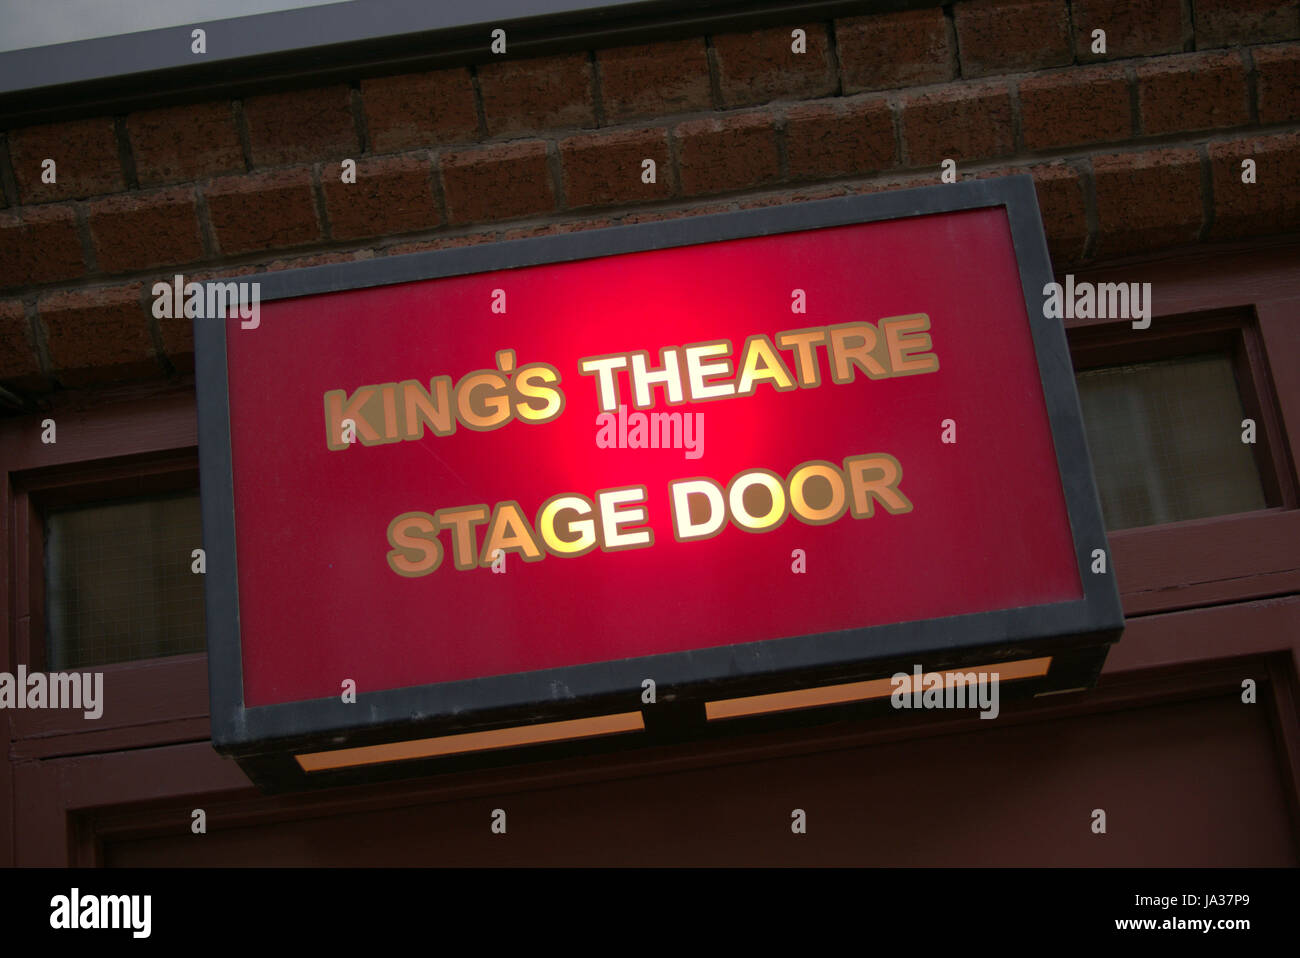 King's Theatre Glasgow stage door sign and light Stock Photo